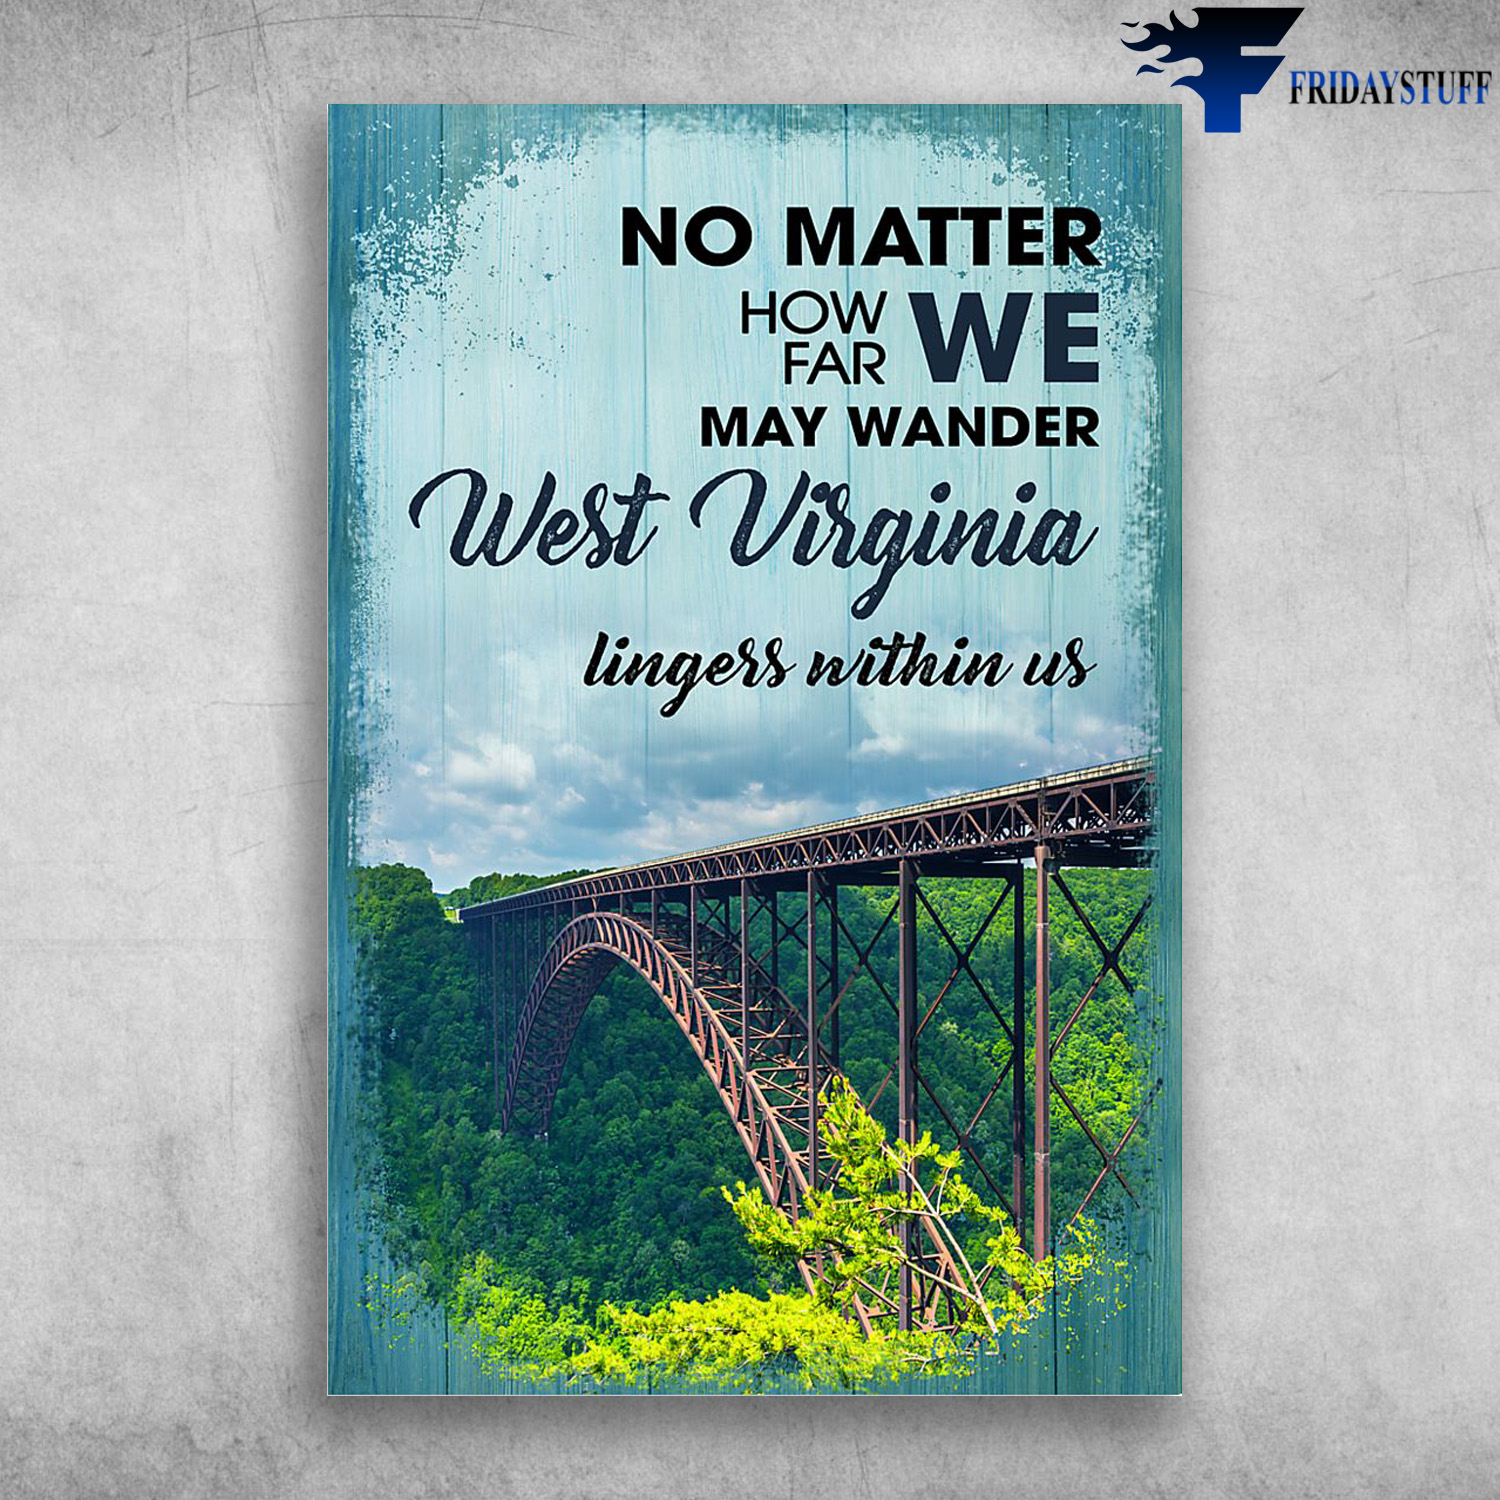 The Bridge In West Virginia - No Matter How Far We May Wander, West Virginia Lingers Within Us